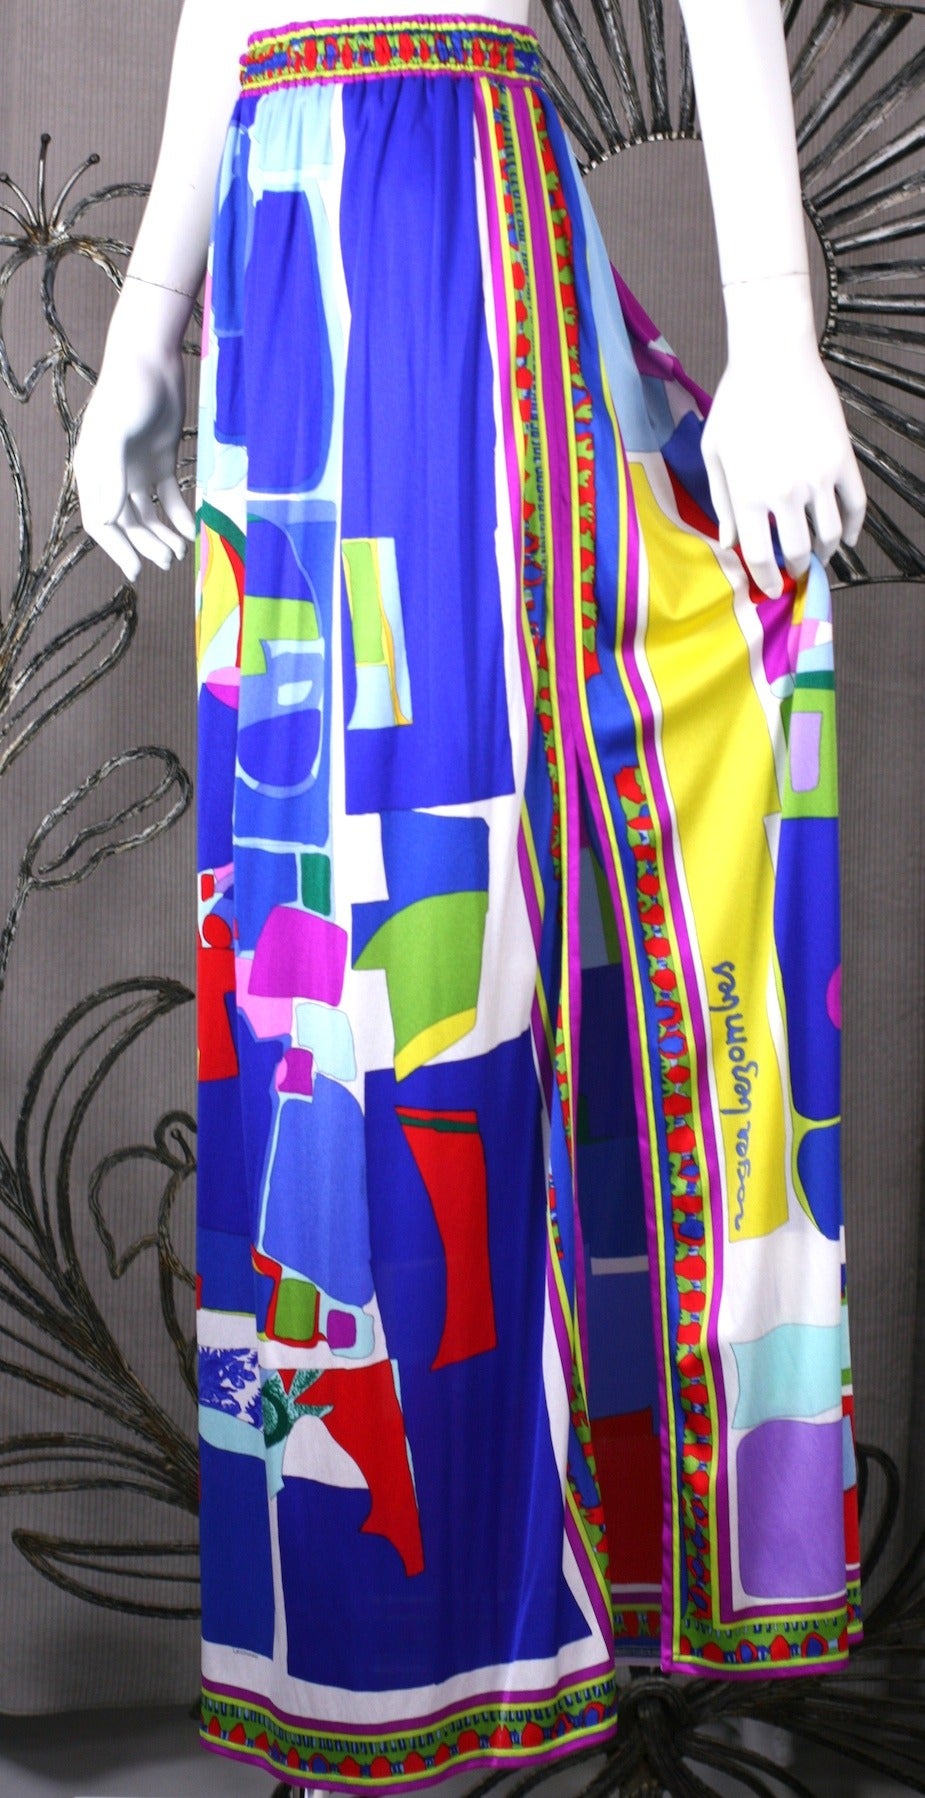 Synthetic knit maxi beach skirt by Leonard, Paris with slit which can be worn in different positions. Elastic waist entry. Colorful graphics by French artist Roger Bezombes (signature on slit). Predominantly on blue base. France 1980's. 
Excellent